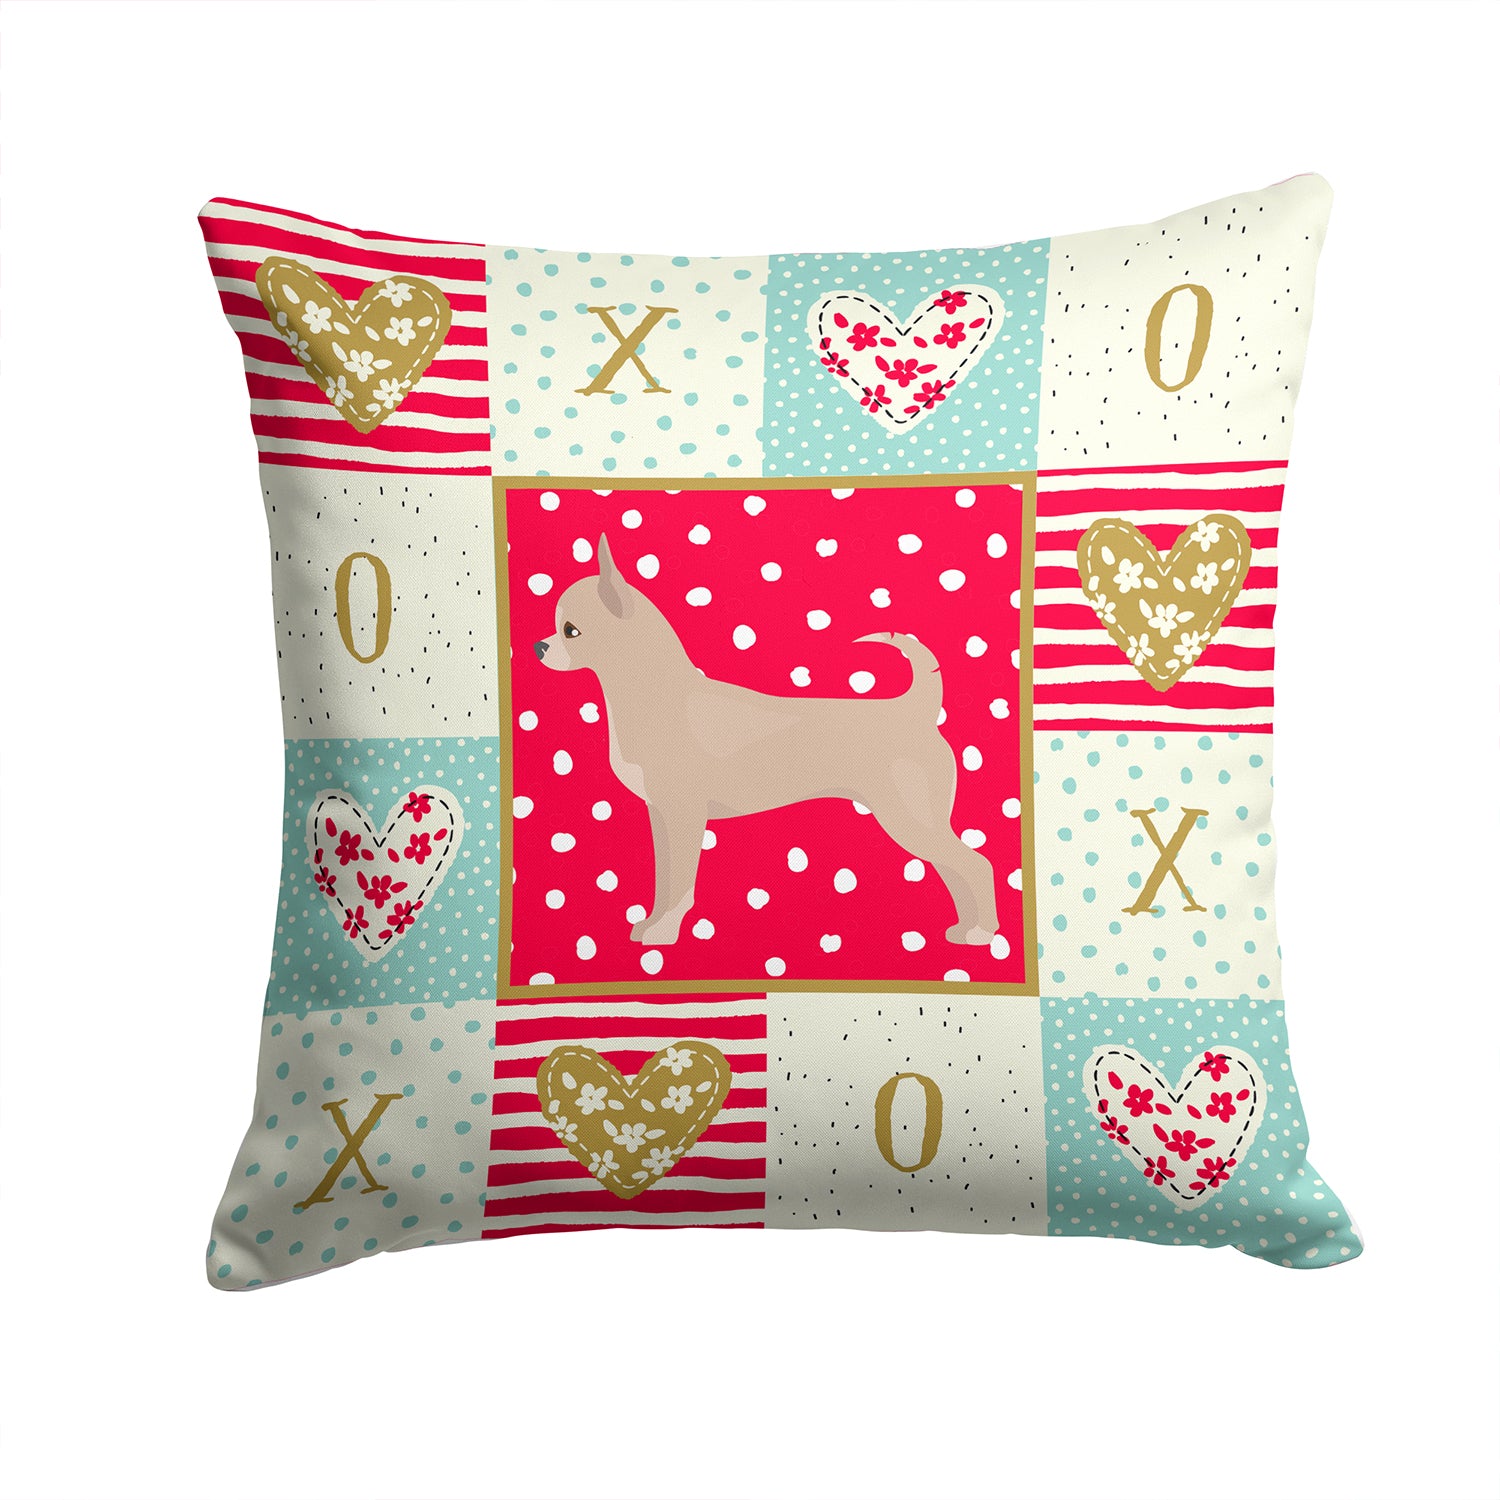 Chihuahua Love Fabric Decorative Pillow CK5820PW1414 - the-store.com